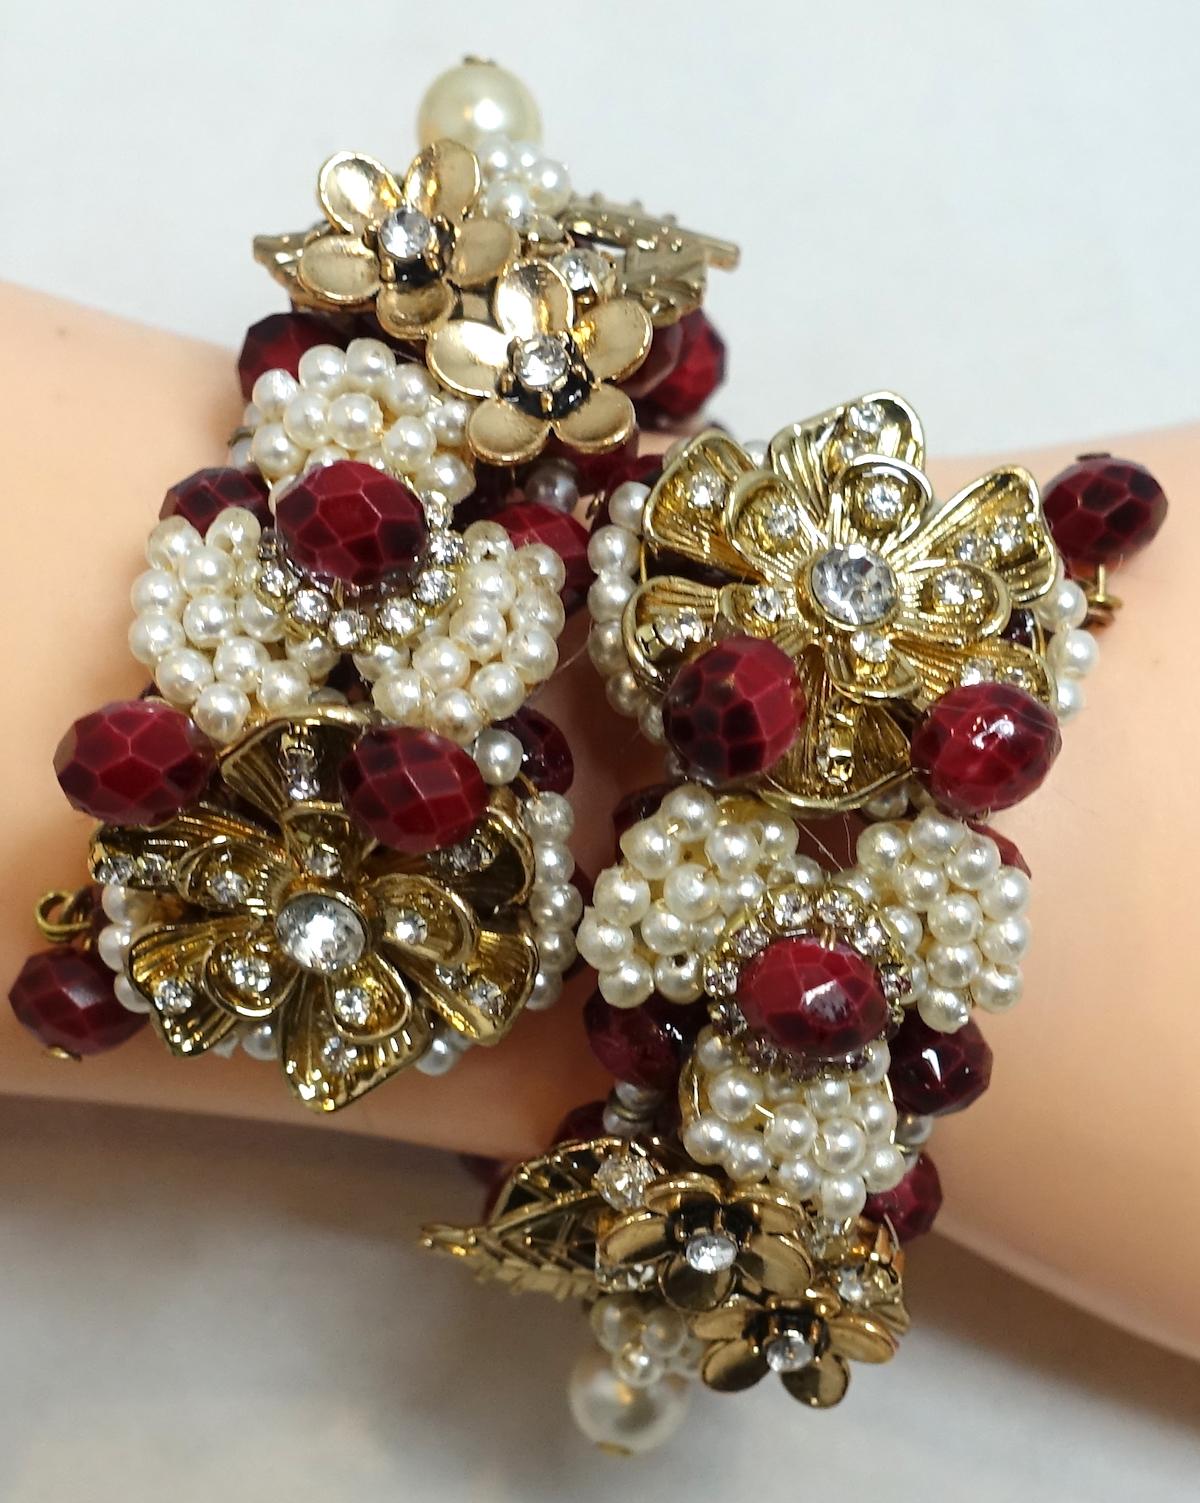 We believe this is a Miriam Haskell vintage wrap bracelet with burgundy glass beads in the center with clear crystals in a floral design. This wrap bracelet is in a gold tone setting and measure 9” around the inside. The centerpiece is 1” wide and